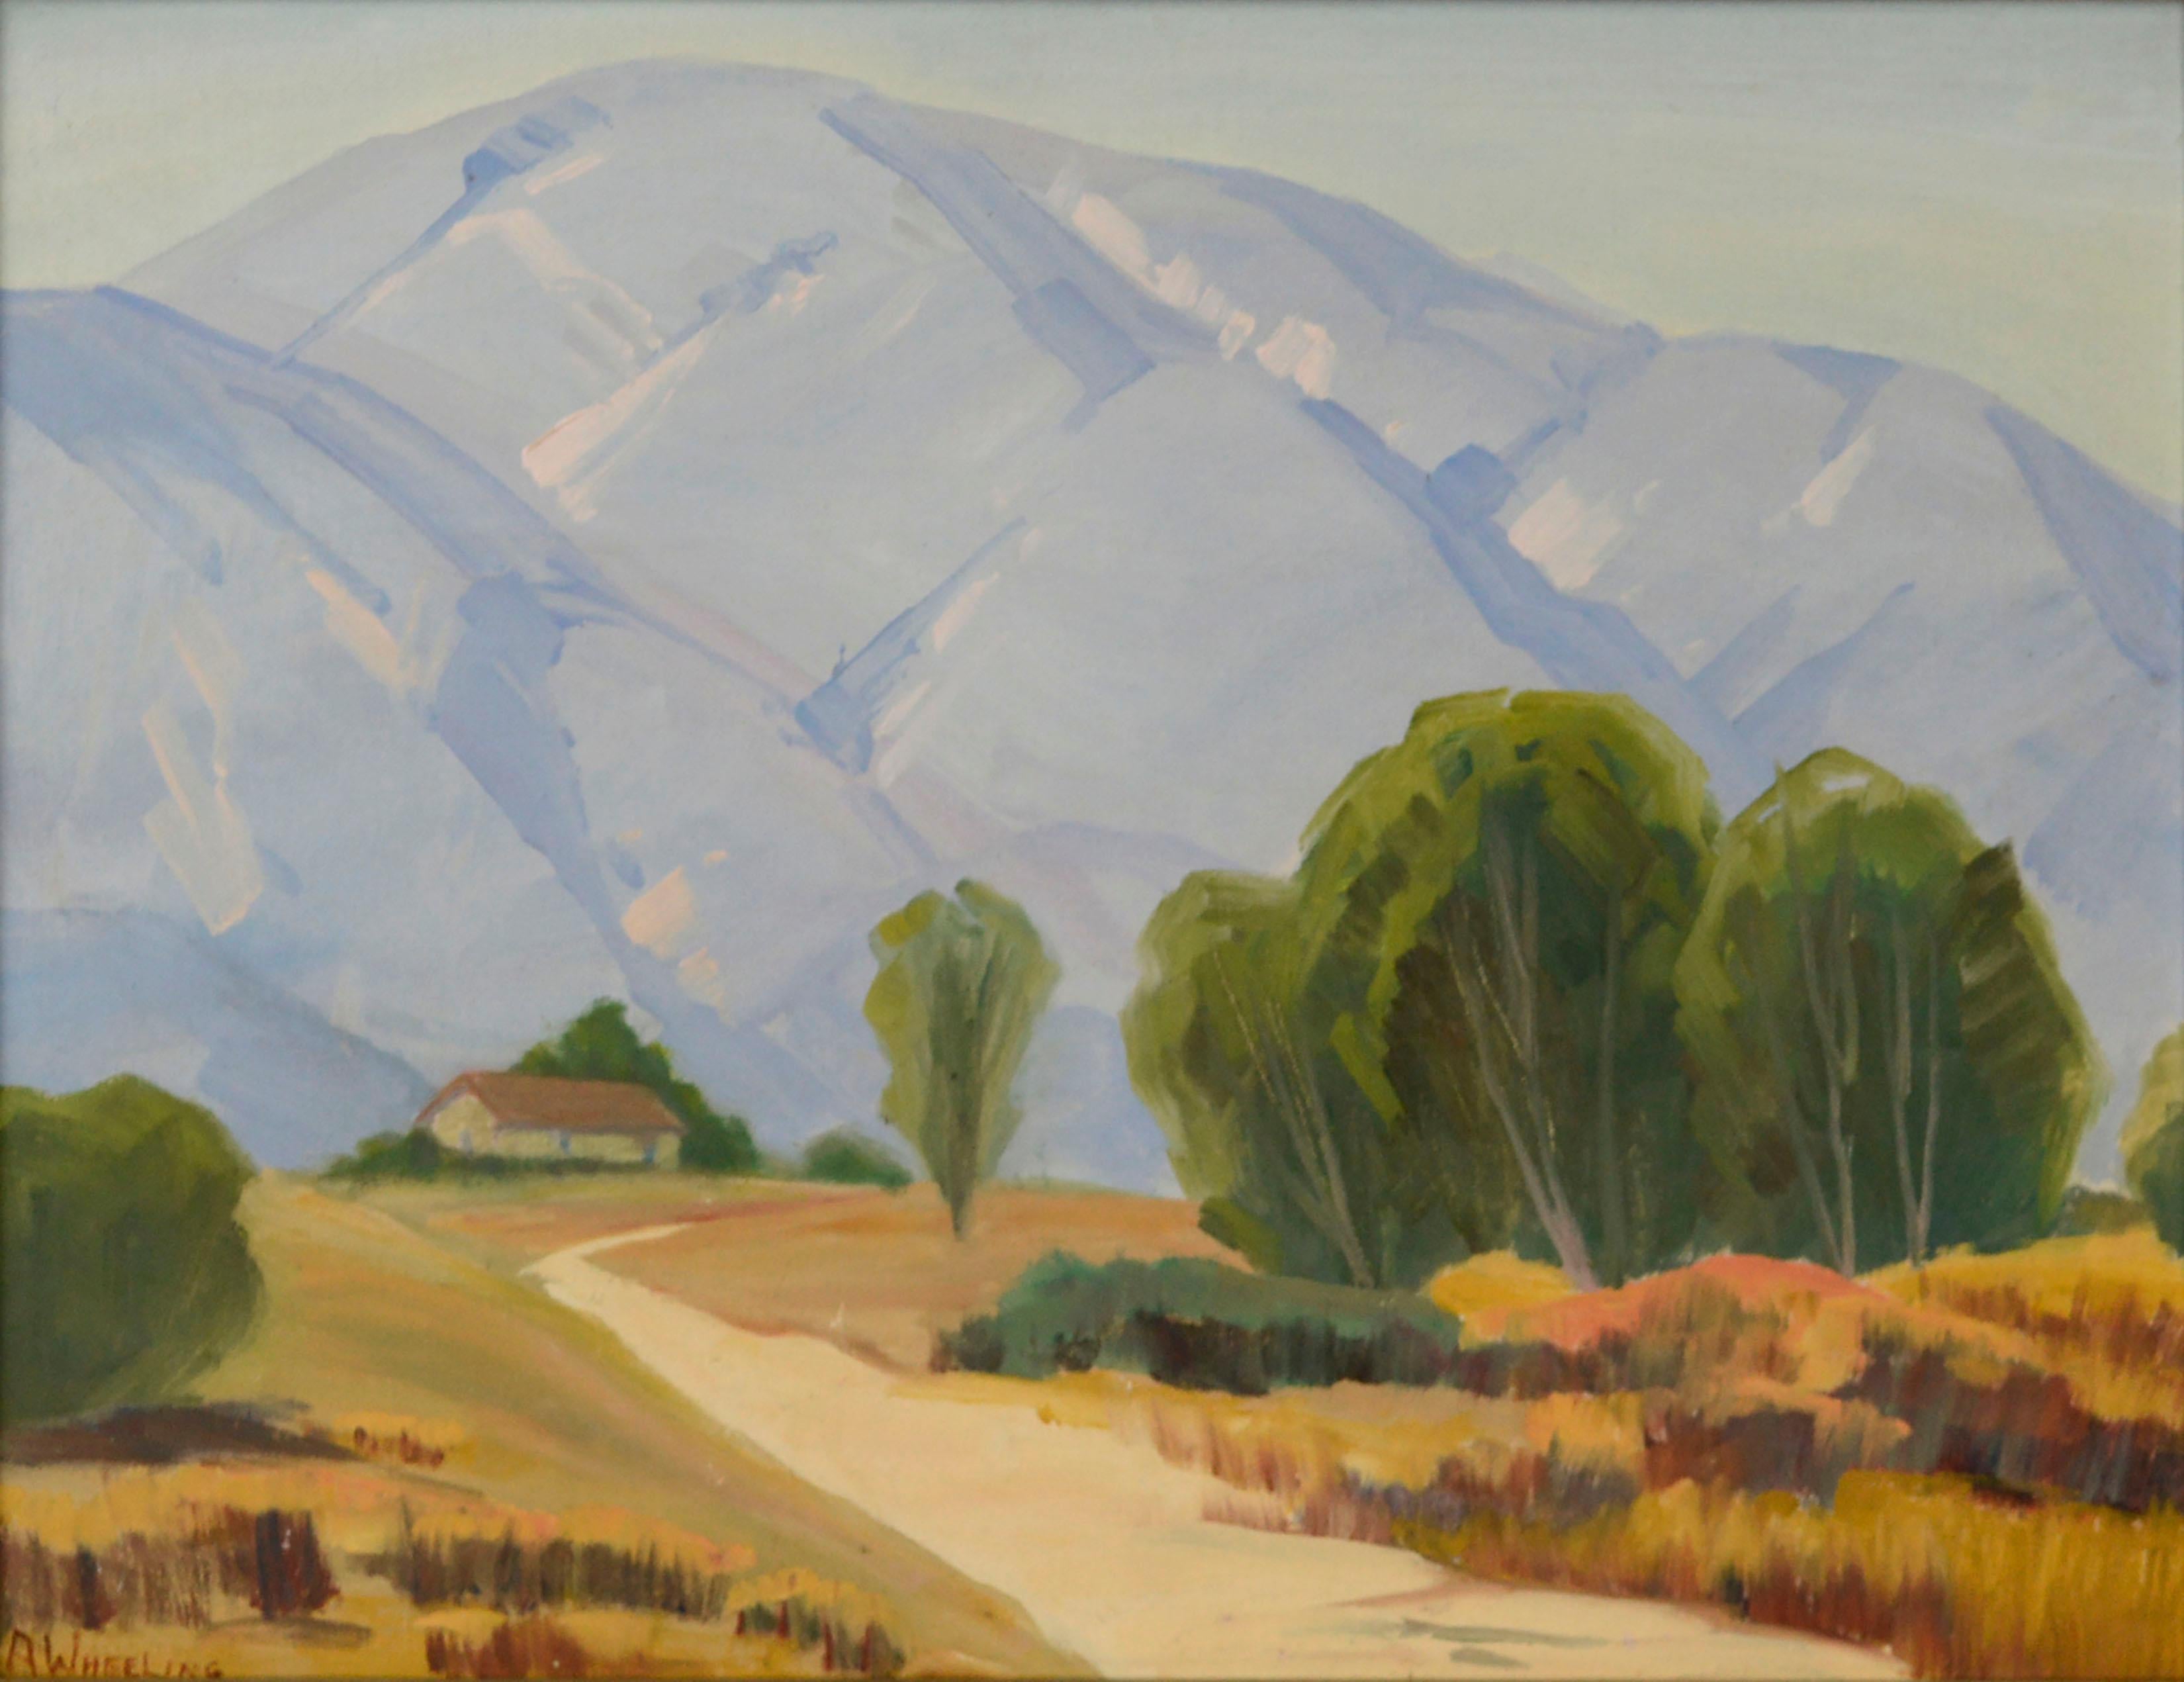 House in the Valley, Mid Century San Gabriel Mountains California Landscape  - Painting by A. Wheeling